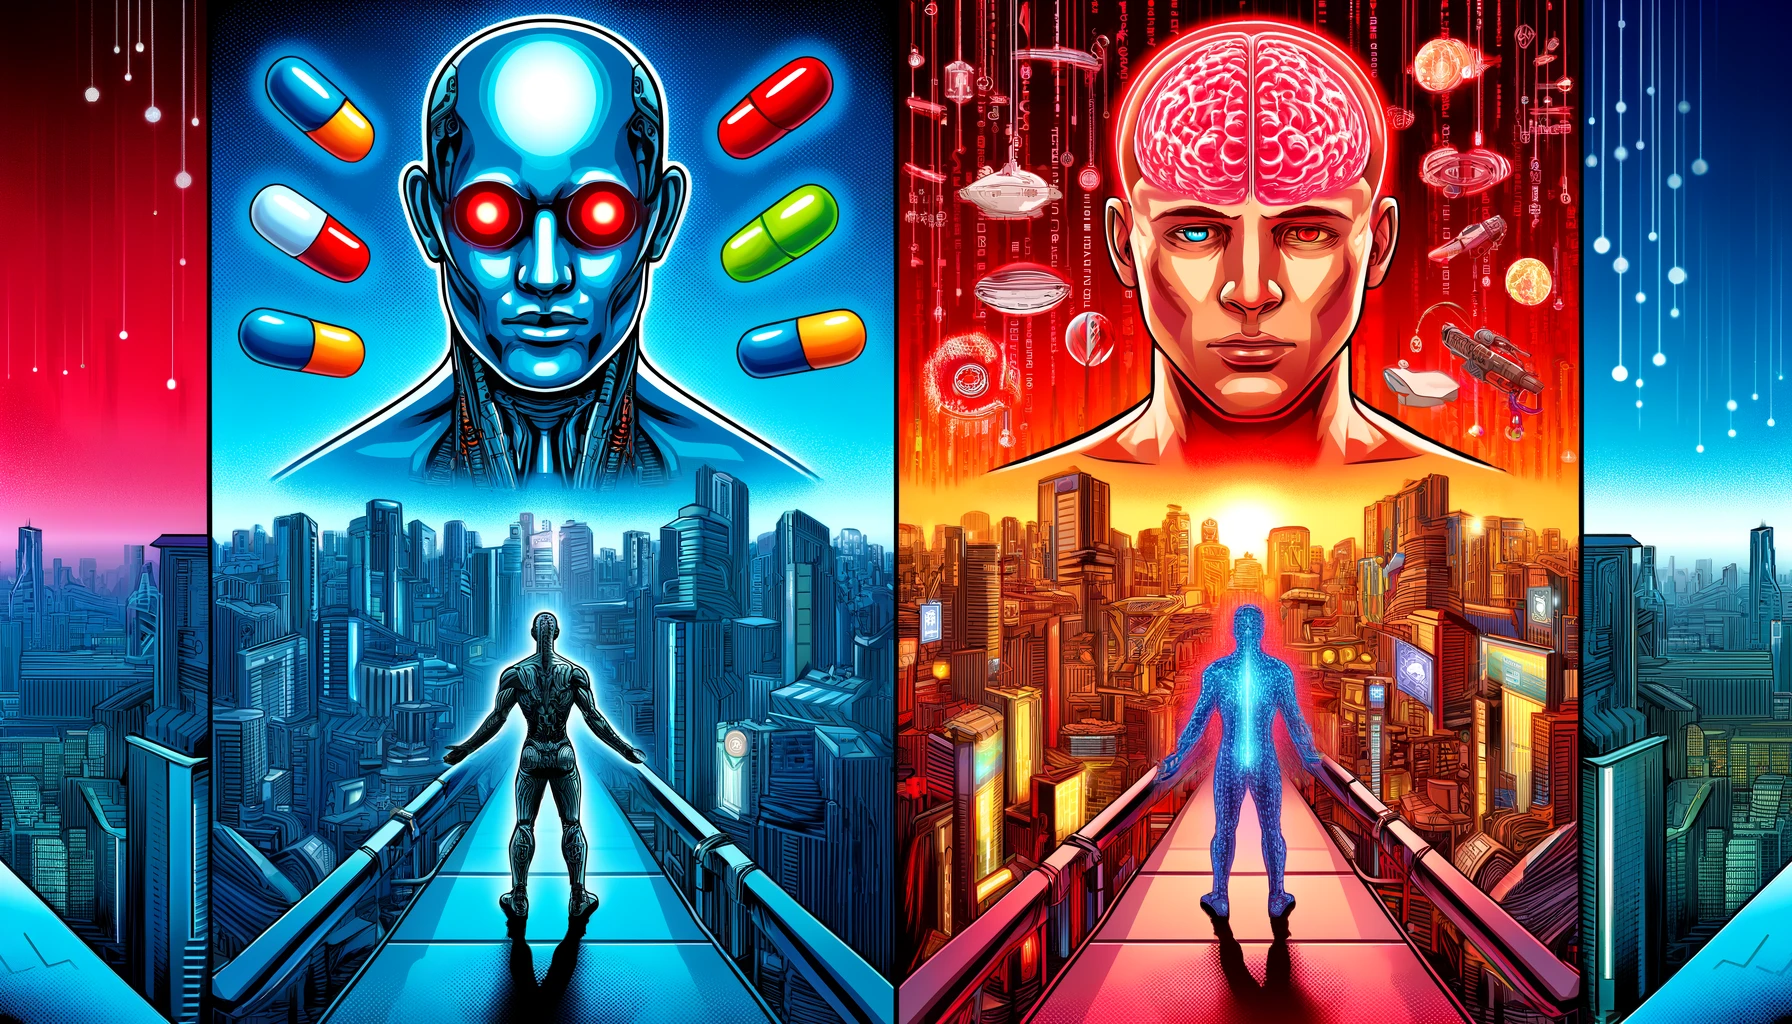 A comic-style, wide image contrasting Artificial General Intelligence (AGI) and Augmented Human Intelligence (AHI). On the left, depict AGI as a humanoid robot, symbolizing autonomy and cold intelligence, with a futuristic city background. On the right, show a human with augmented brain capabilities, symbolizing AHI, connected to advanced technology and interfaces, with a vibrant, high-tech cityscape. In the center, Morpheus from 'The Matrix' stands, offering a red pill and a blue pill, symbolizing the choice between AHI and AGI, creating a striking visual metaphor for the decision between these two paths of technological evolution.